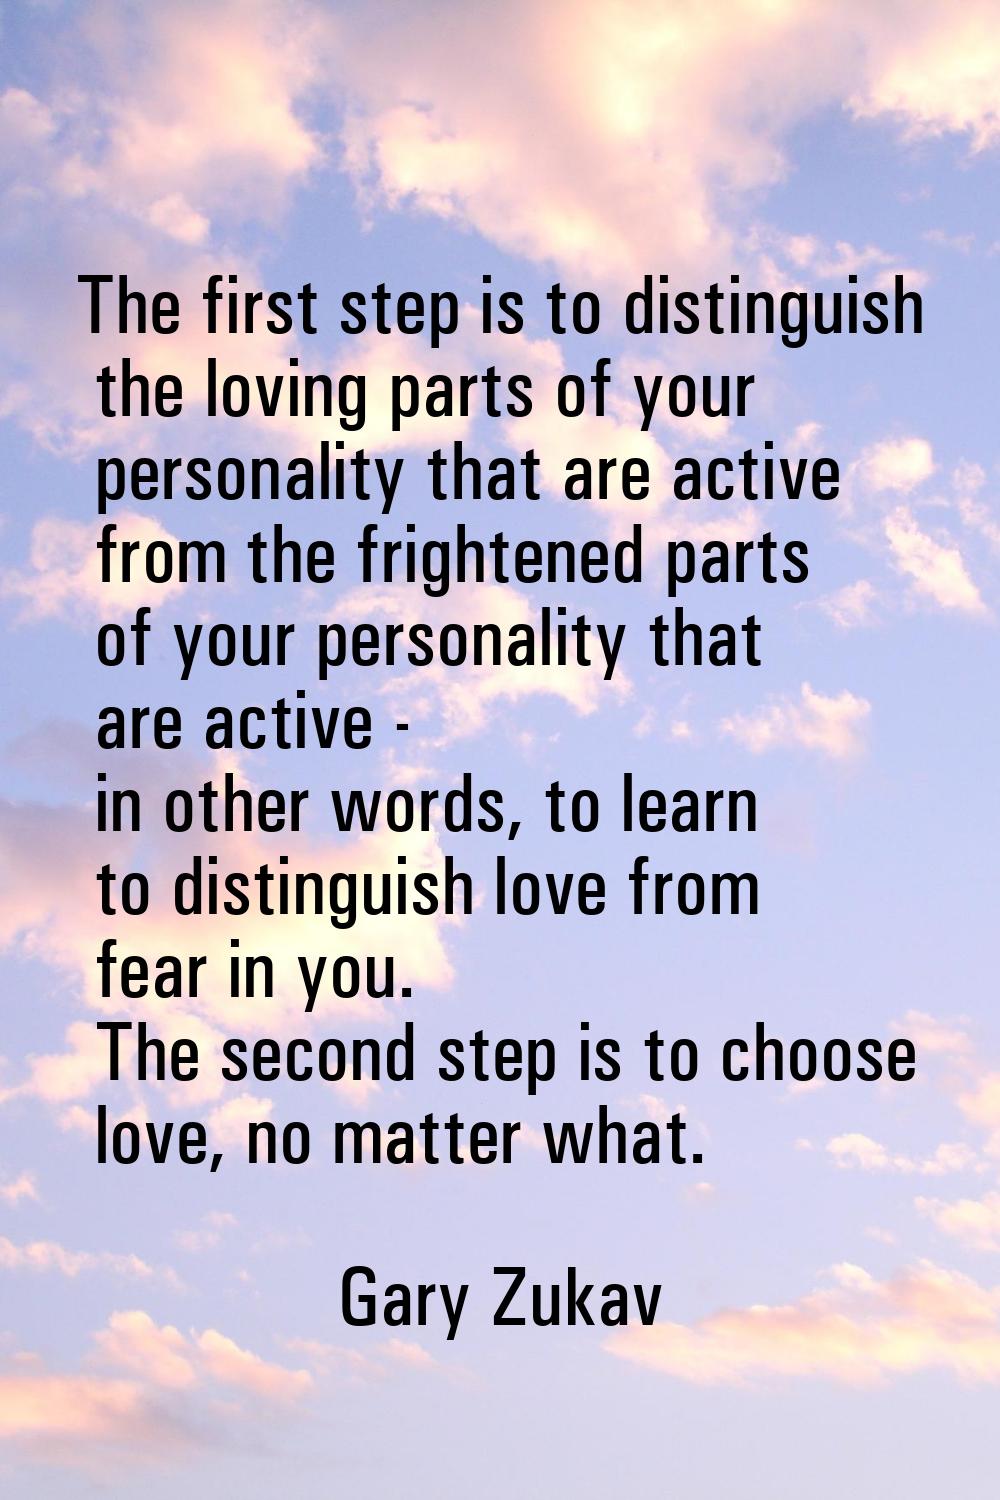 The first step is to distinguish the loving parts of your personality that are active from the frig